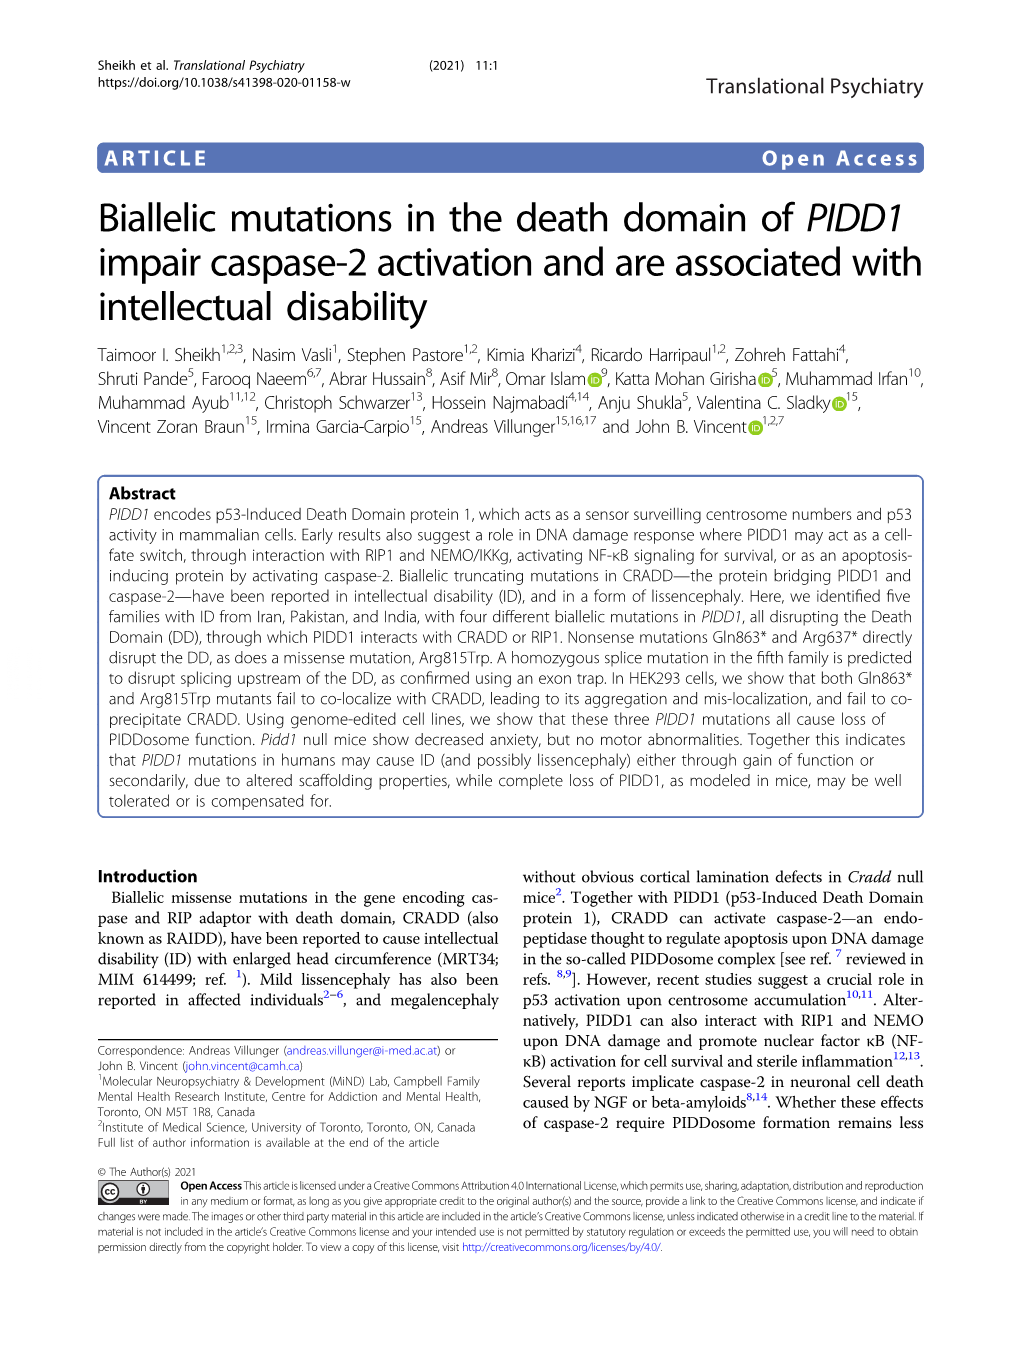 Biallelic Mutations in the Death Domain of PIDD1 Impair Caspase-2 Activation and Are Associated with Intellectual Disability Taimoor I